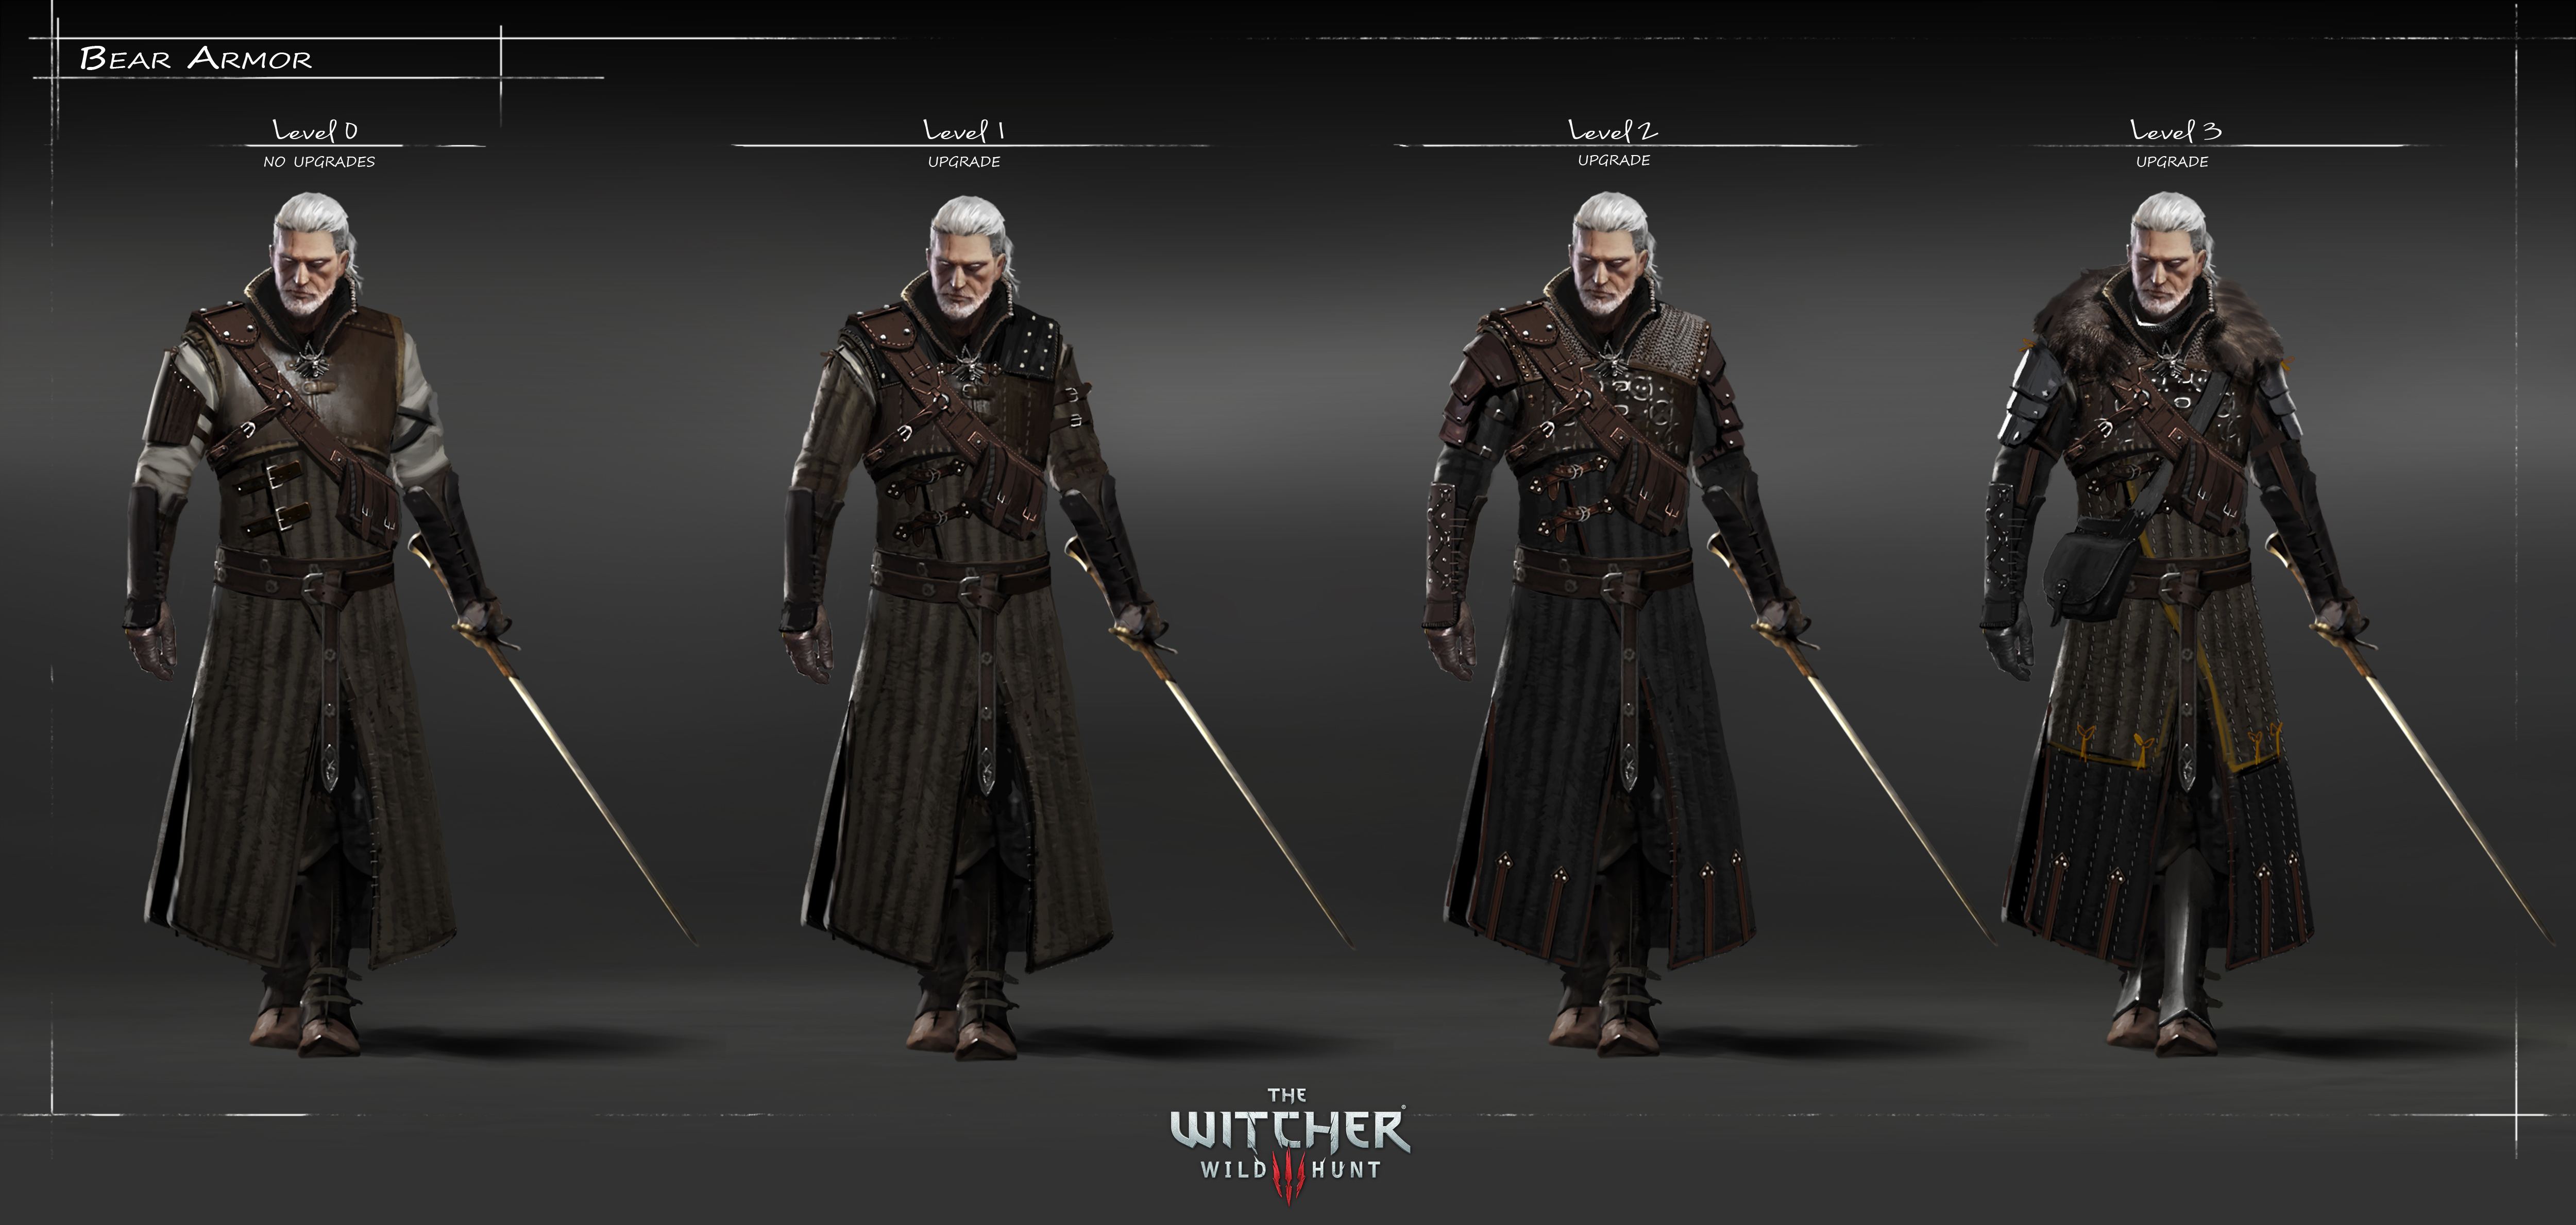 New The Witcher 3 artwork, some nice 1080p screens for wallpapers ...